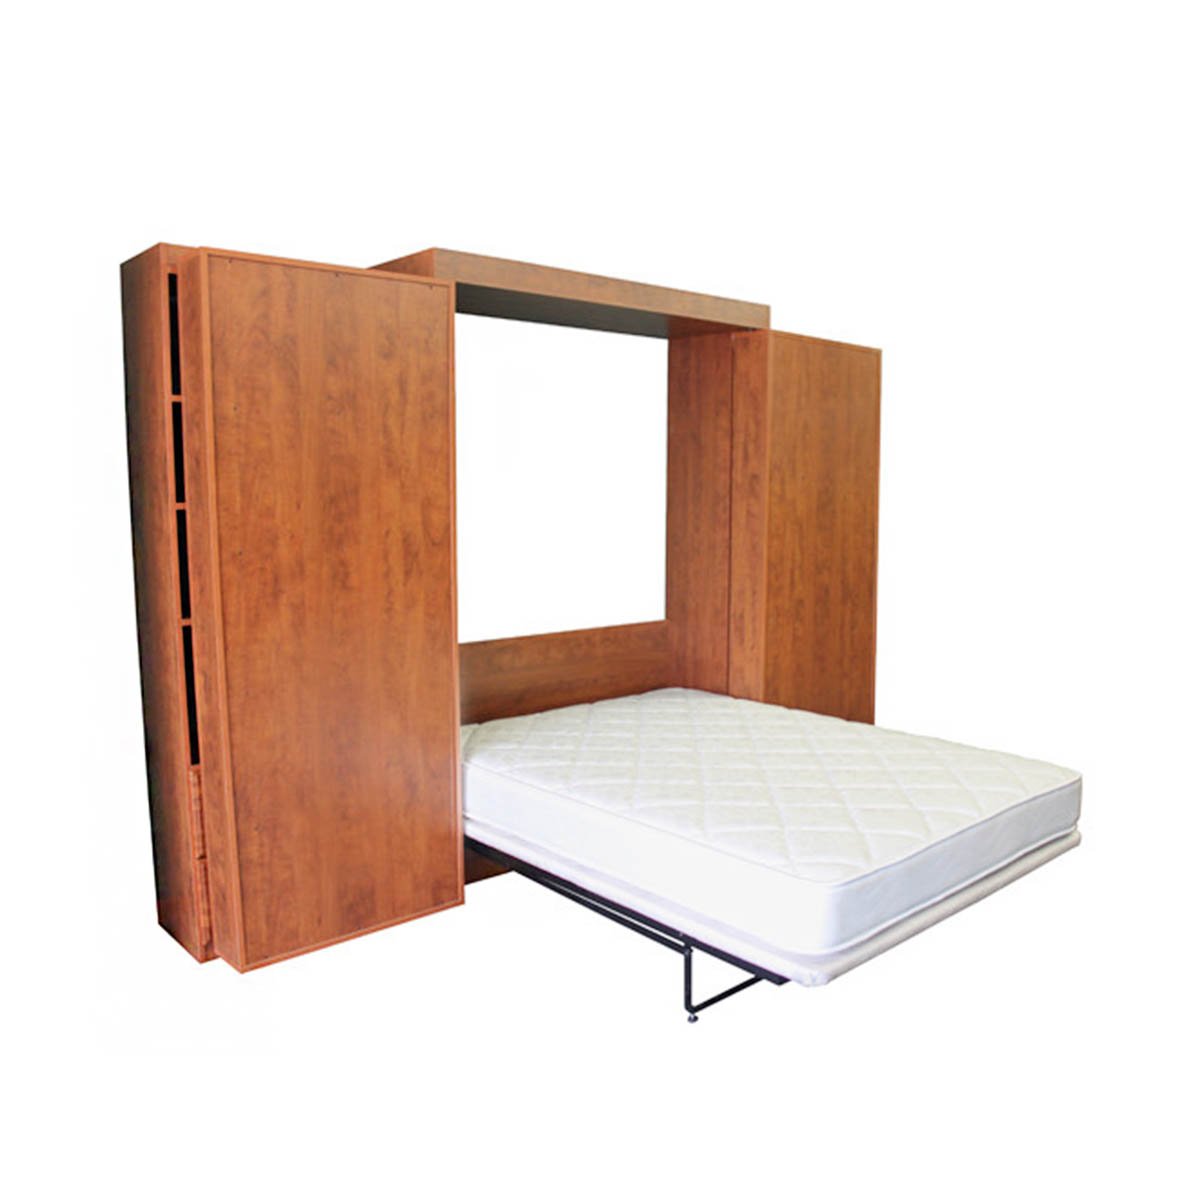 The classic fold-down wallbed